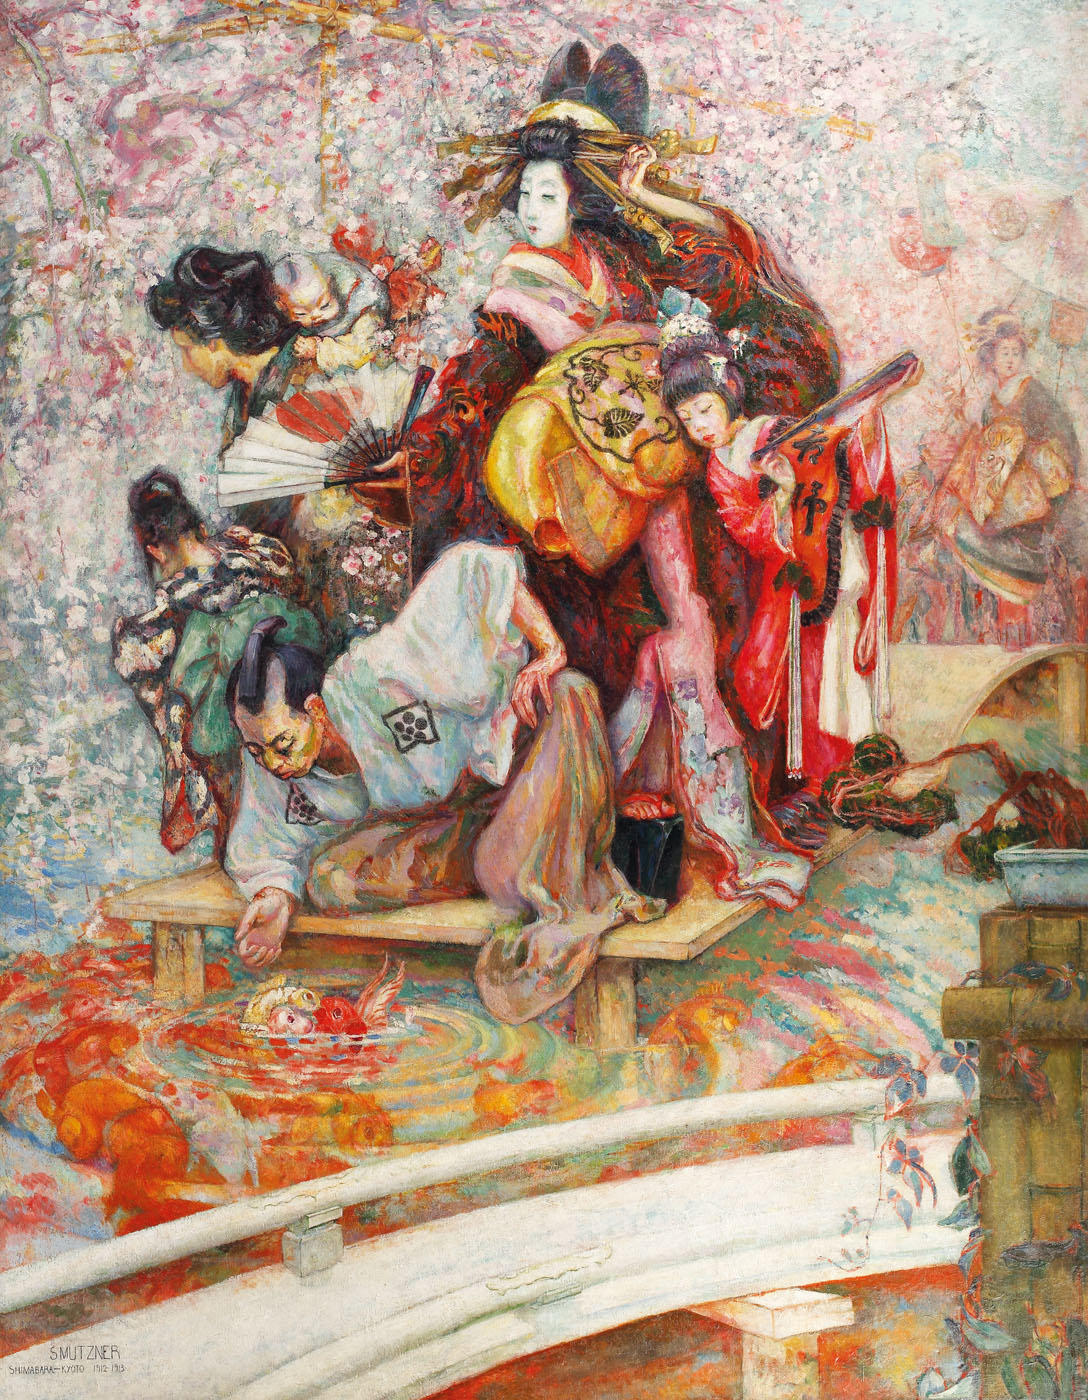 Courtesans from Shimabara [1912-1913], private collection